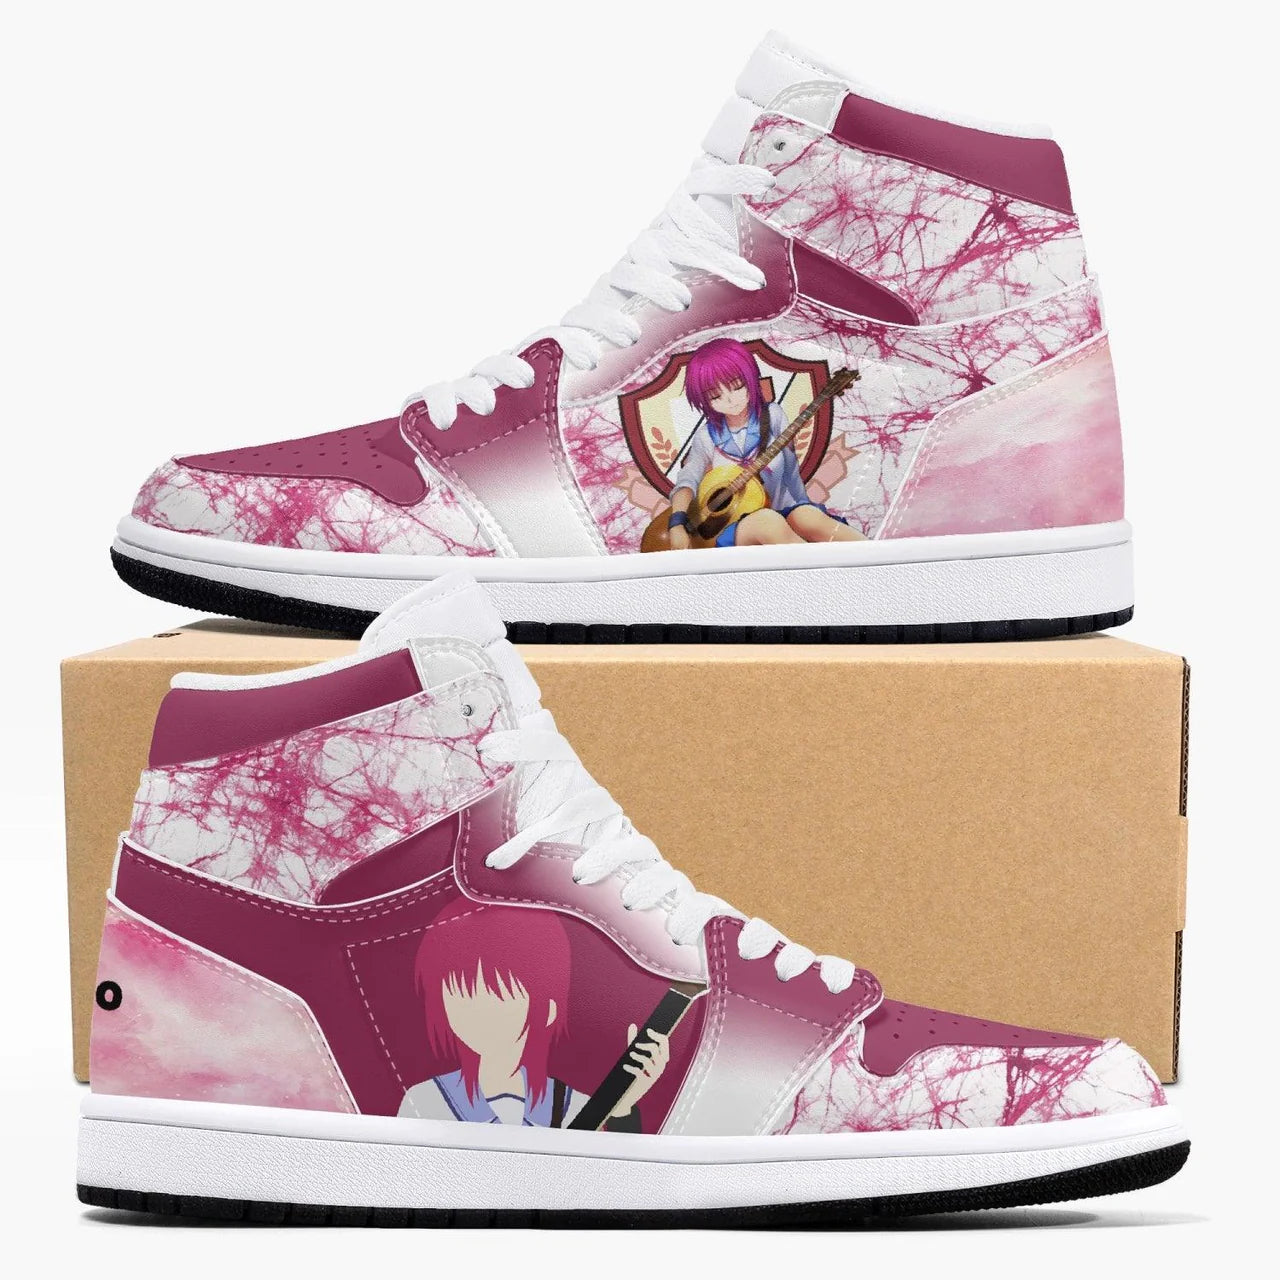 Anime Sneakers: A Perfect Blend of Fashion and Geek Culture - Ayuko